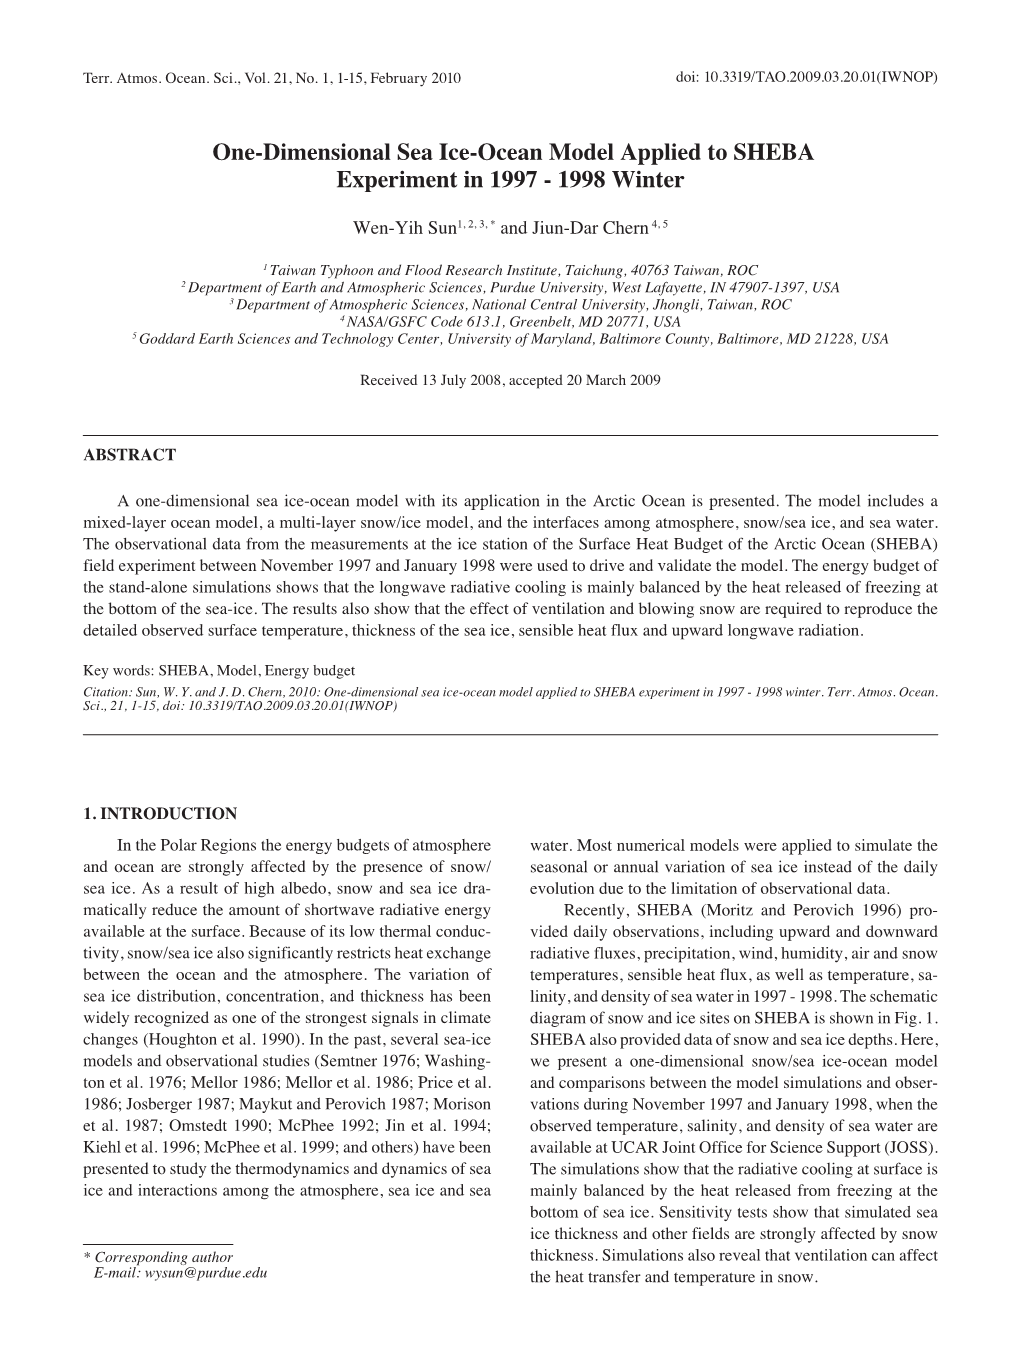 One-Dimensional Sea Ice-Ocean Model Applied to SHEBA Experiment in 1997 - 1998 Winter